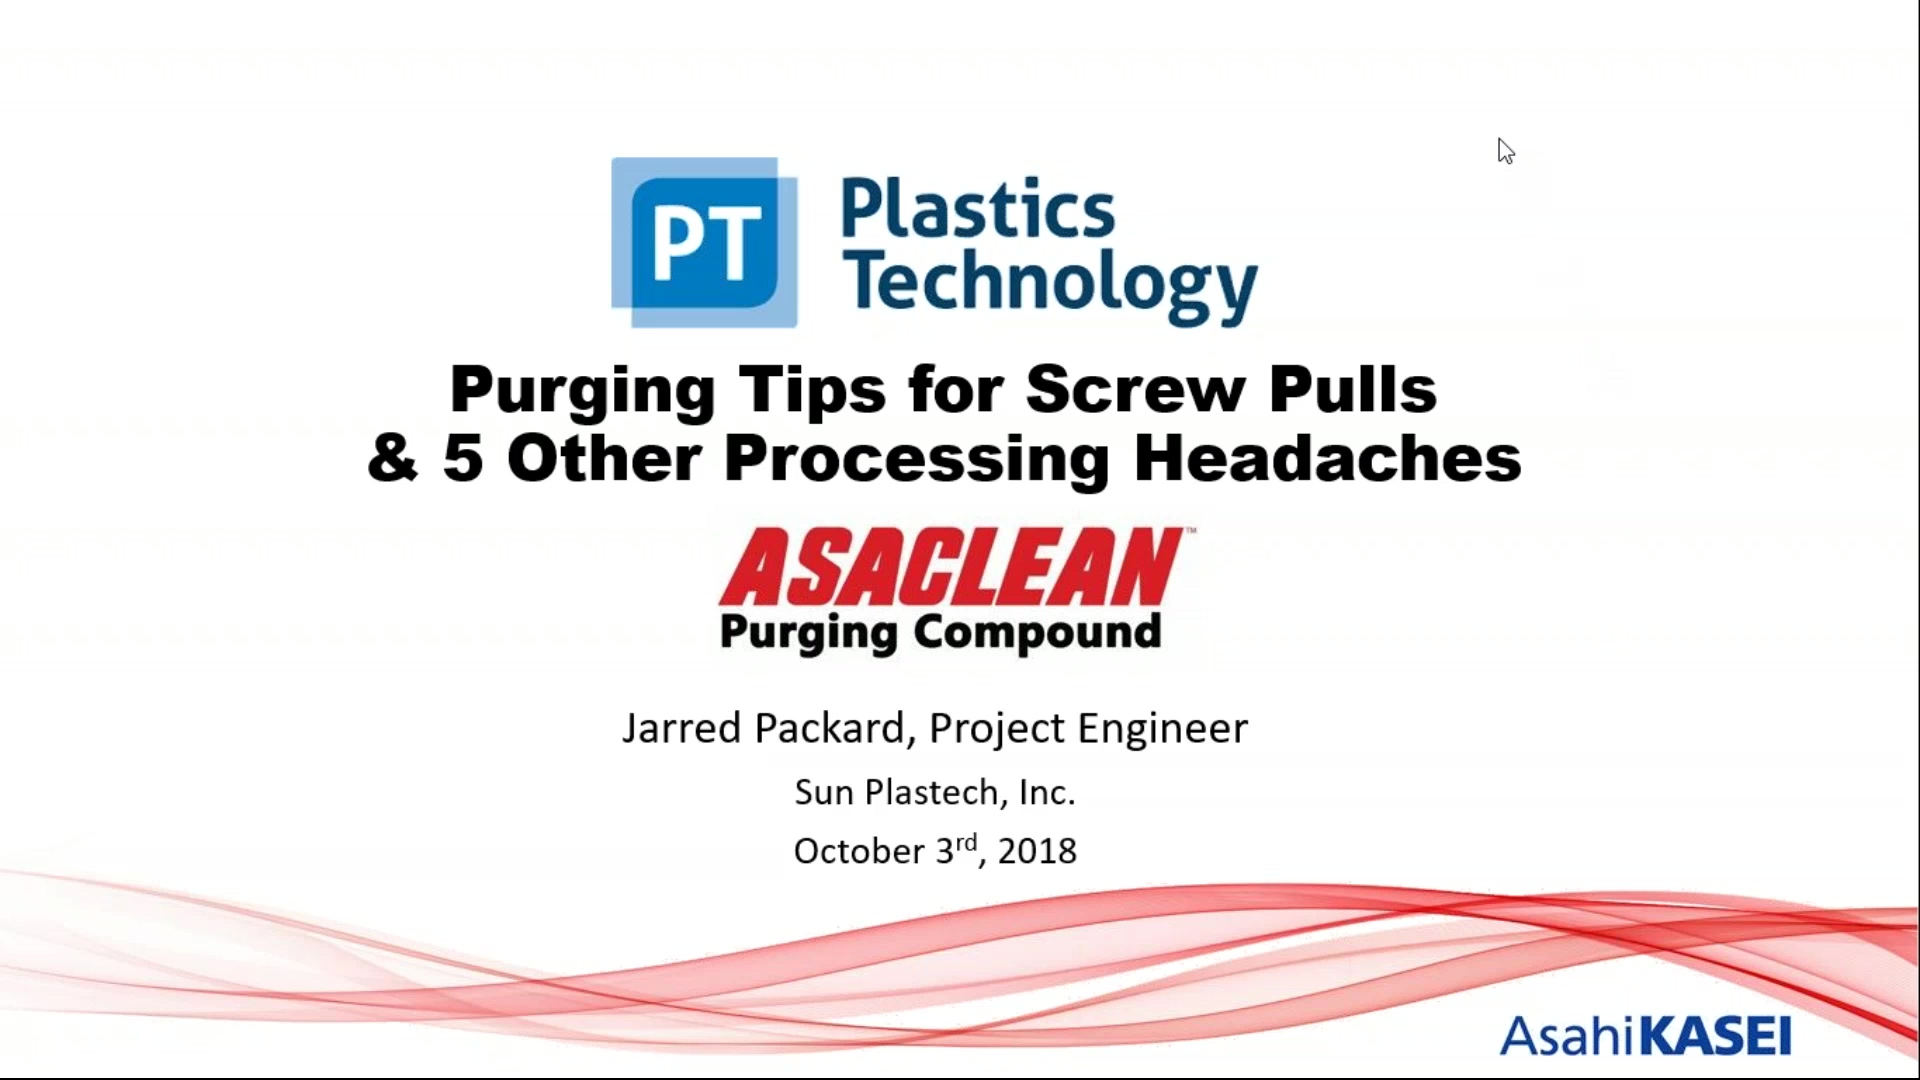 Purging Tips for Screw Pulls and 5 Other Processing Headaches